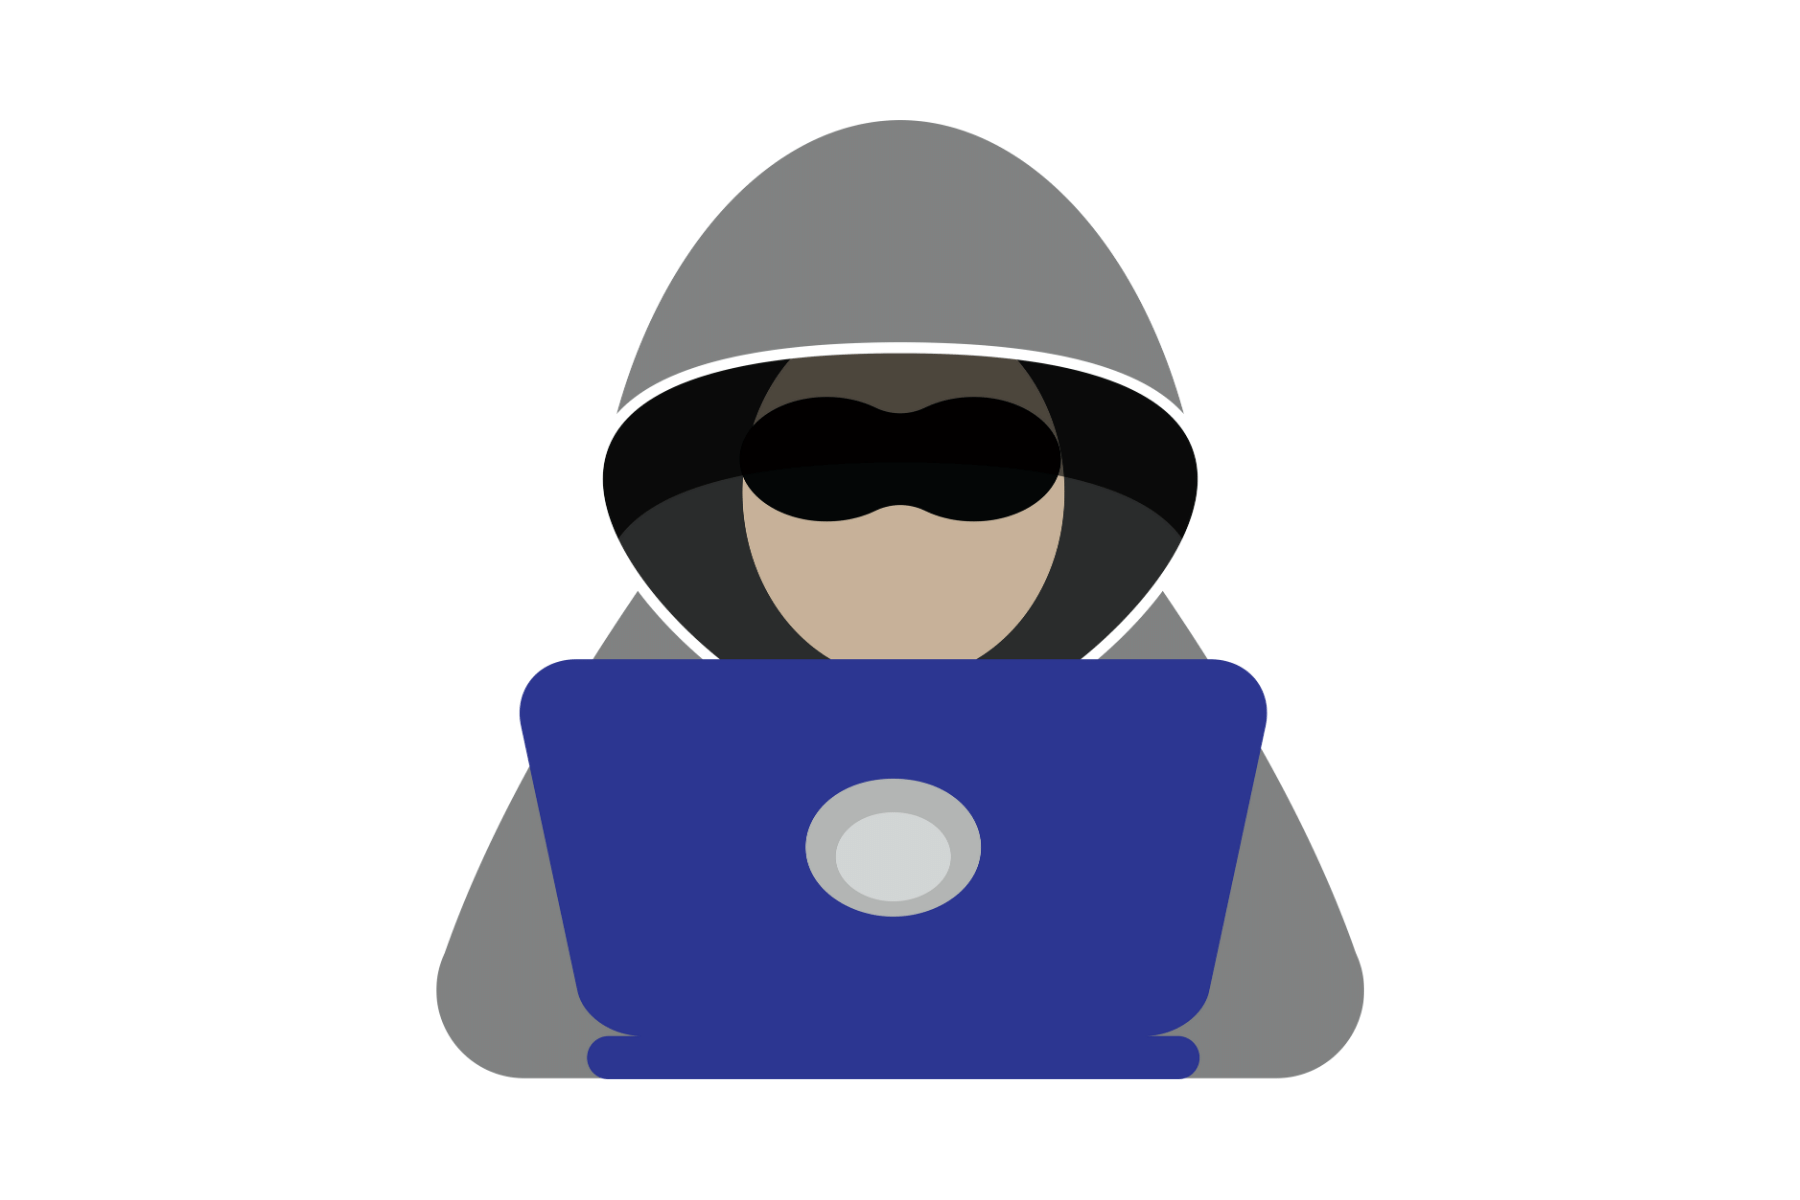 Image of a faceless person with a grey hoodie on sitting in front of a computer screen